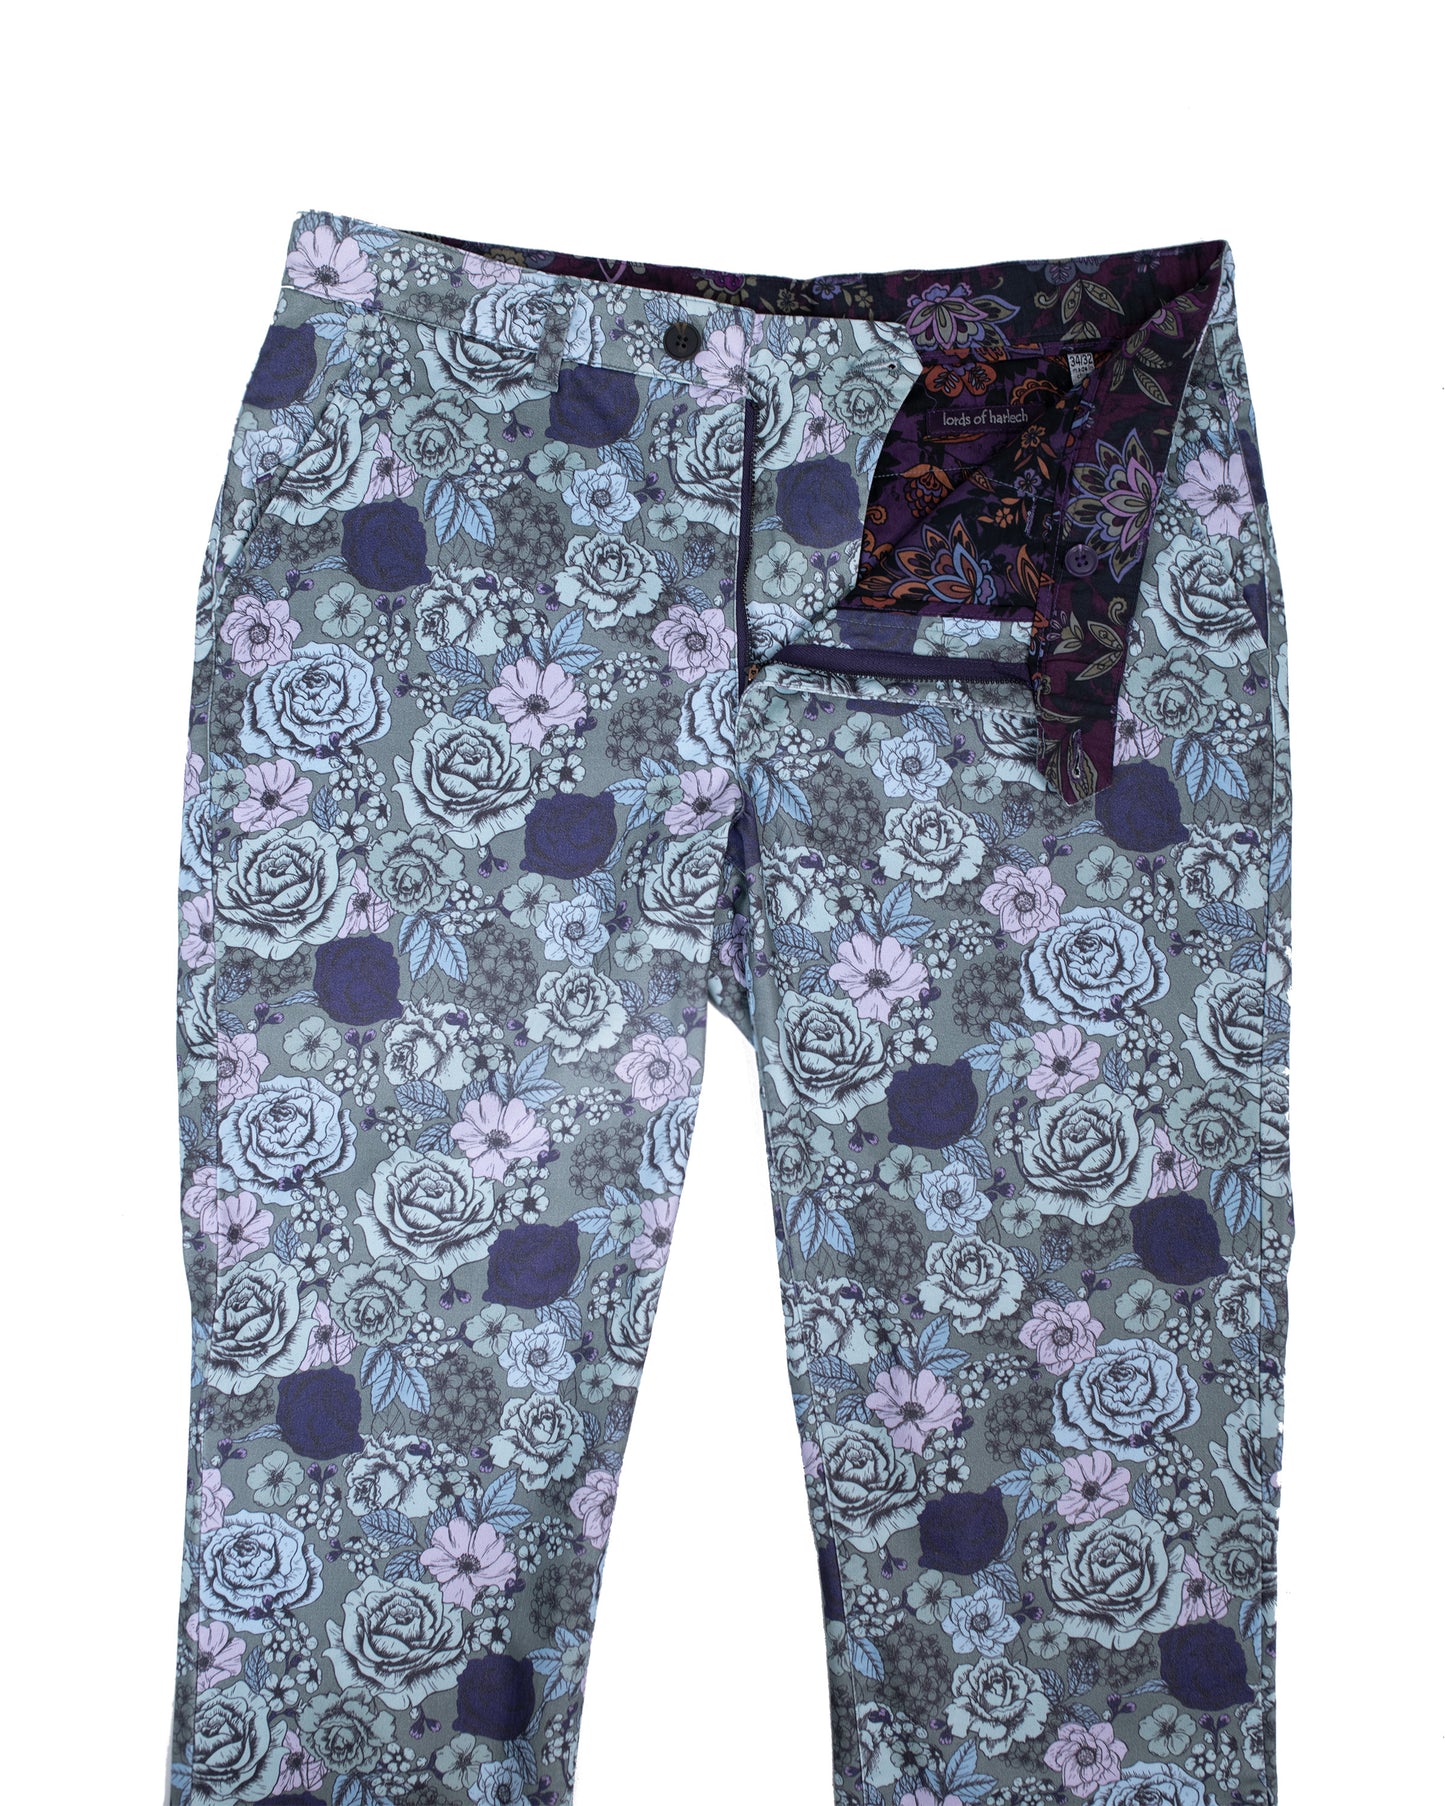 JACK LUX EVERYTHING ROSES PANT IN TURF